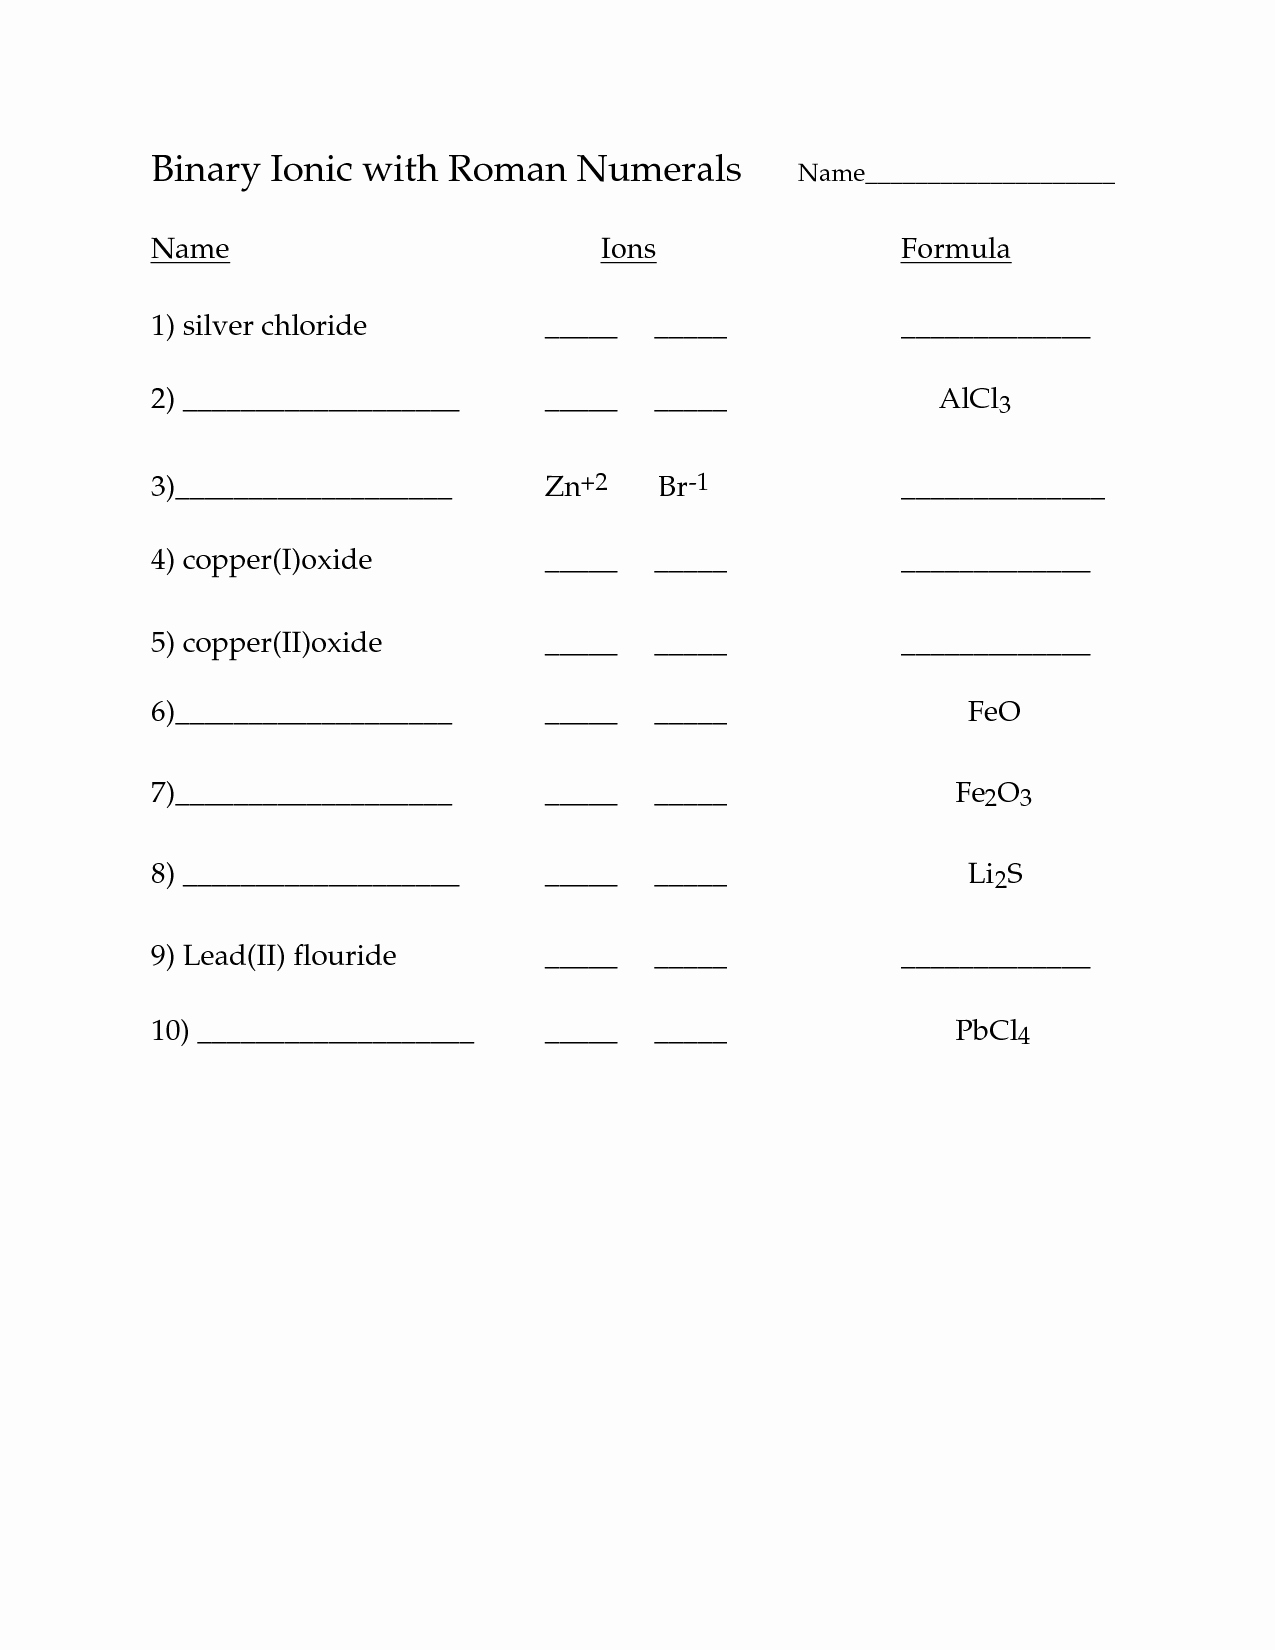 Simple Binary Ionic Compounds Worksheet Unique 47 Binary Ionic Pounds Worksheet Answers Binary Ionic